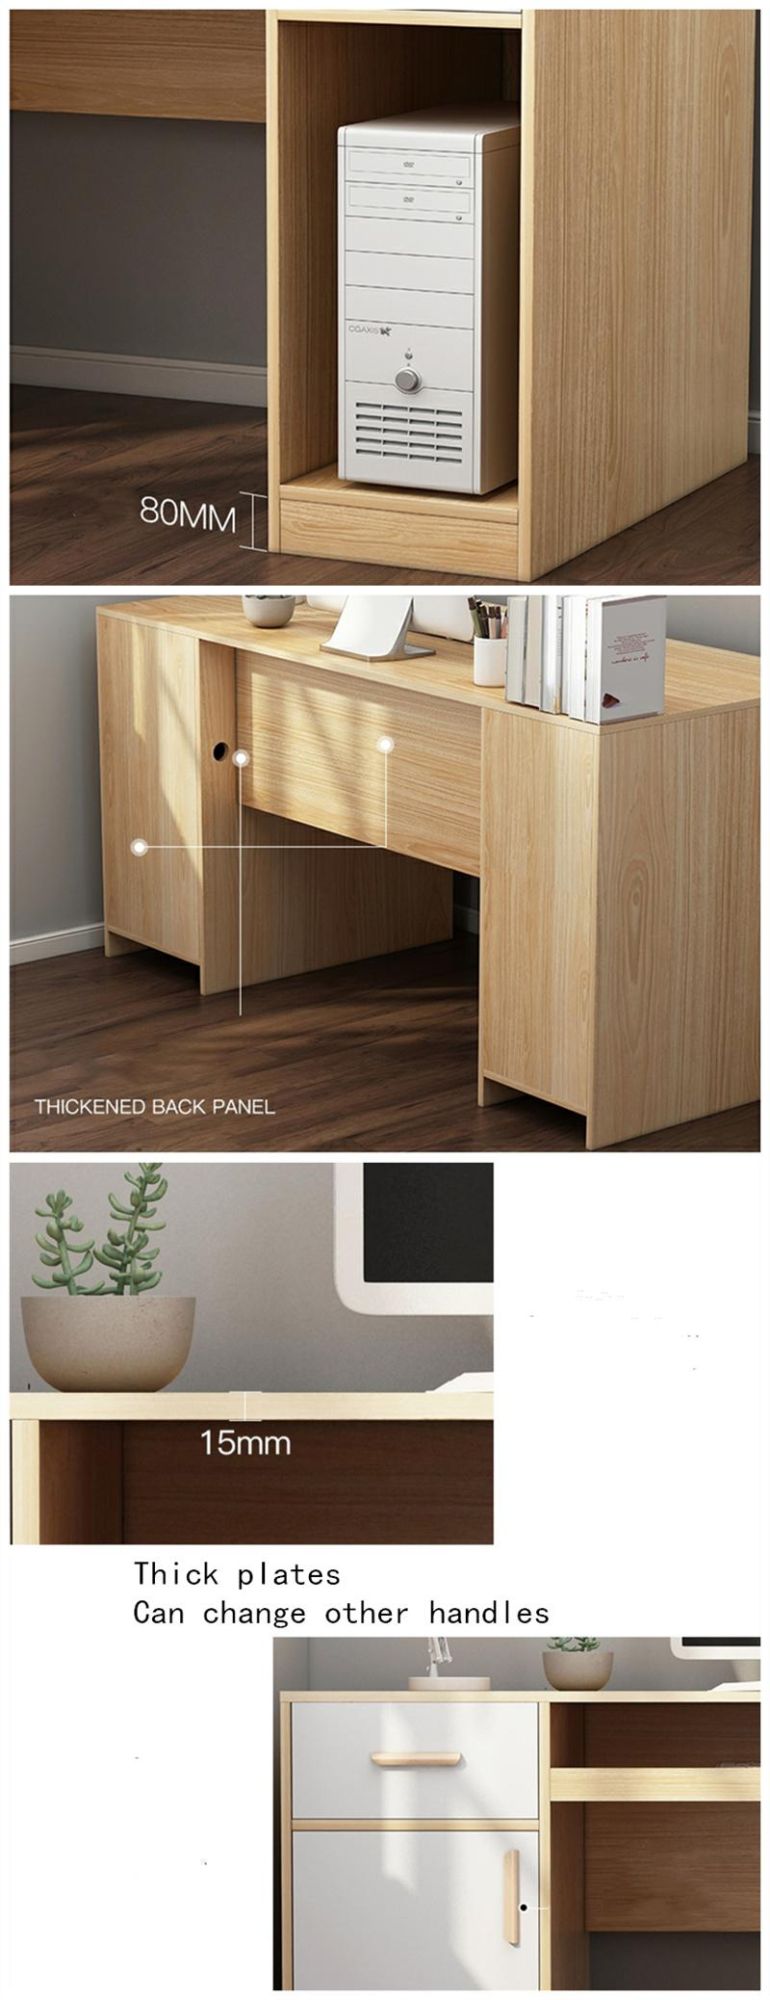 Foshan Wooden Cheap Modern Home Office Furniture Laptop Stand Study Table Computer Desk with Drawers Cabinets